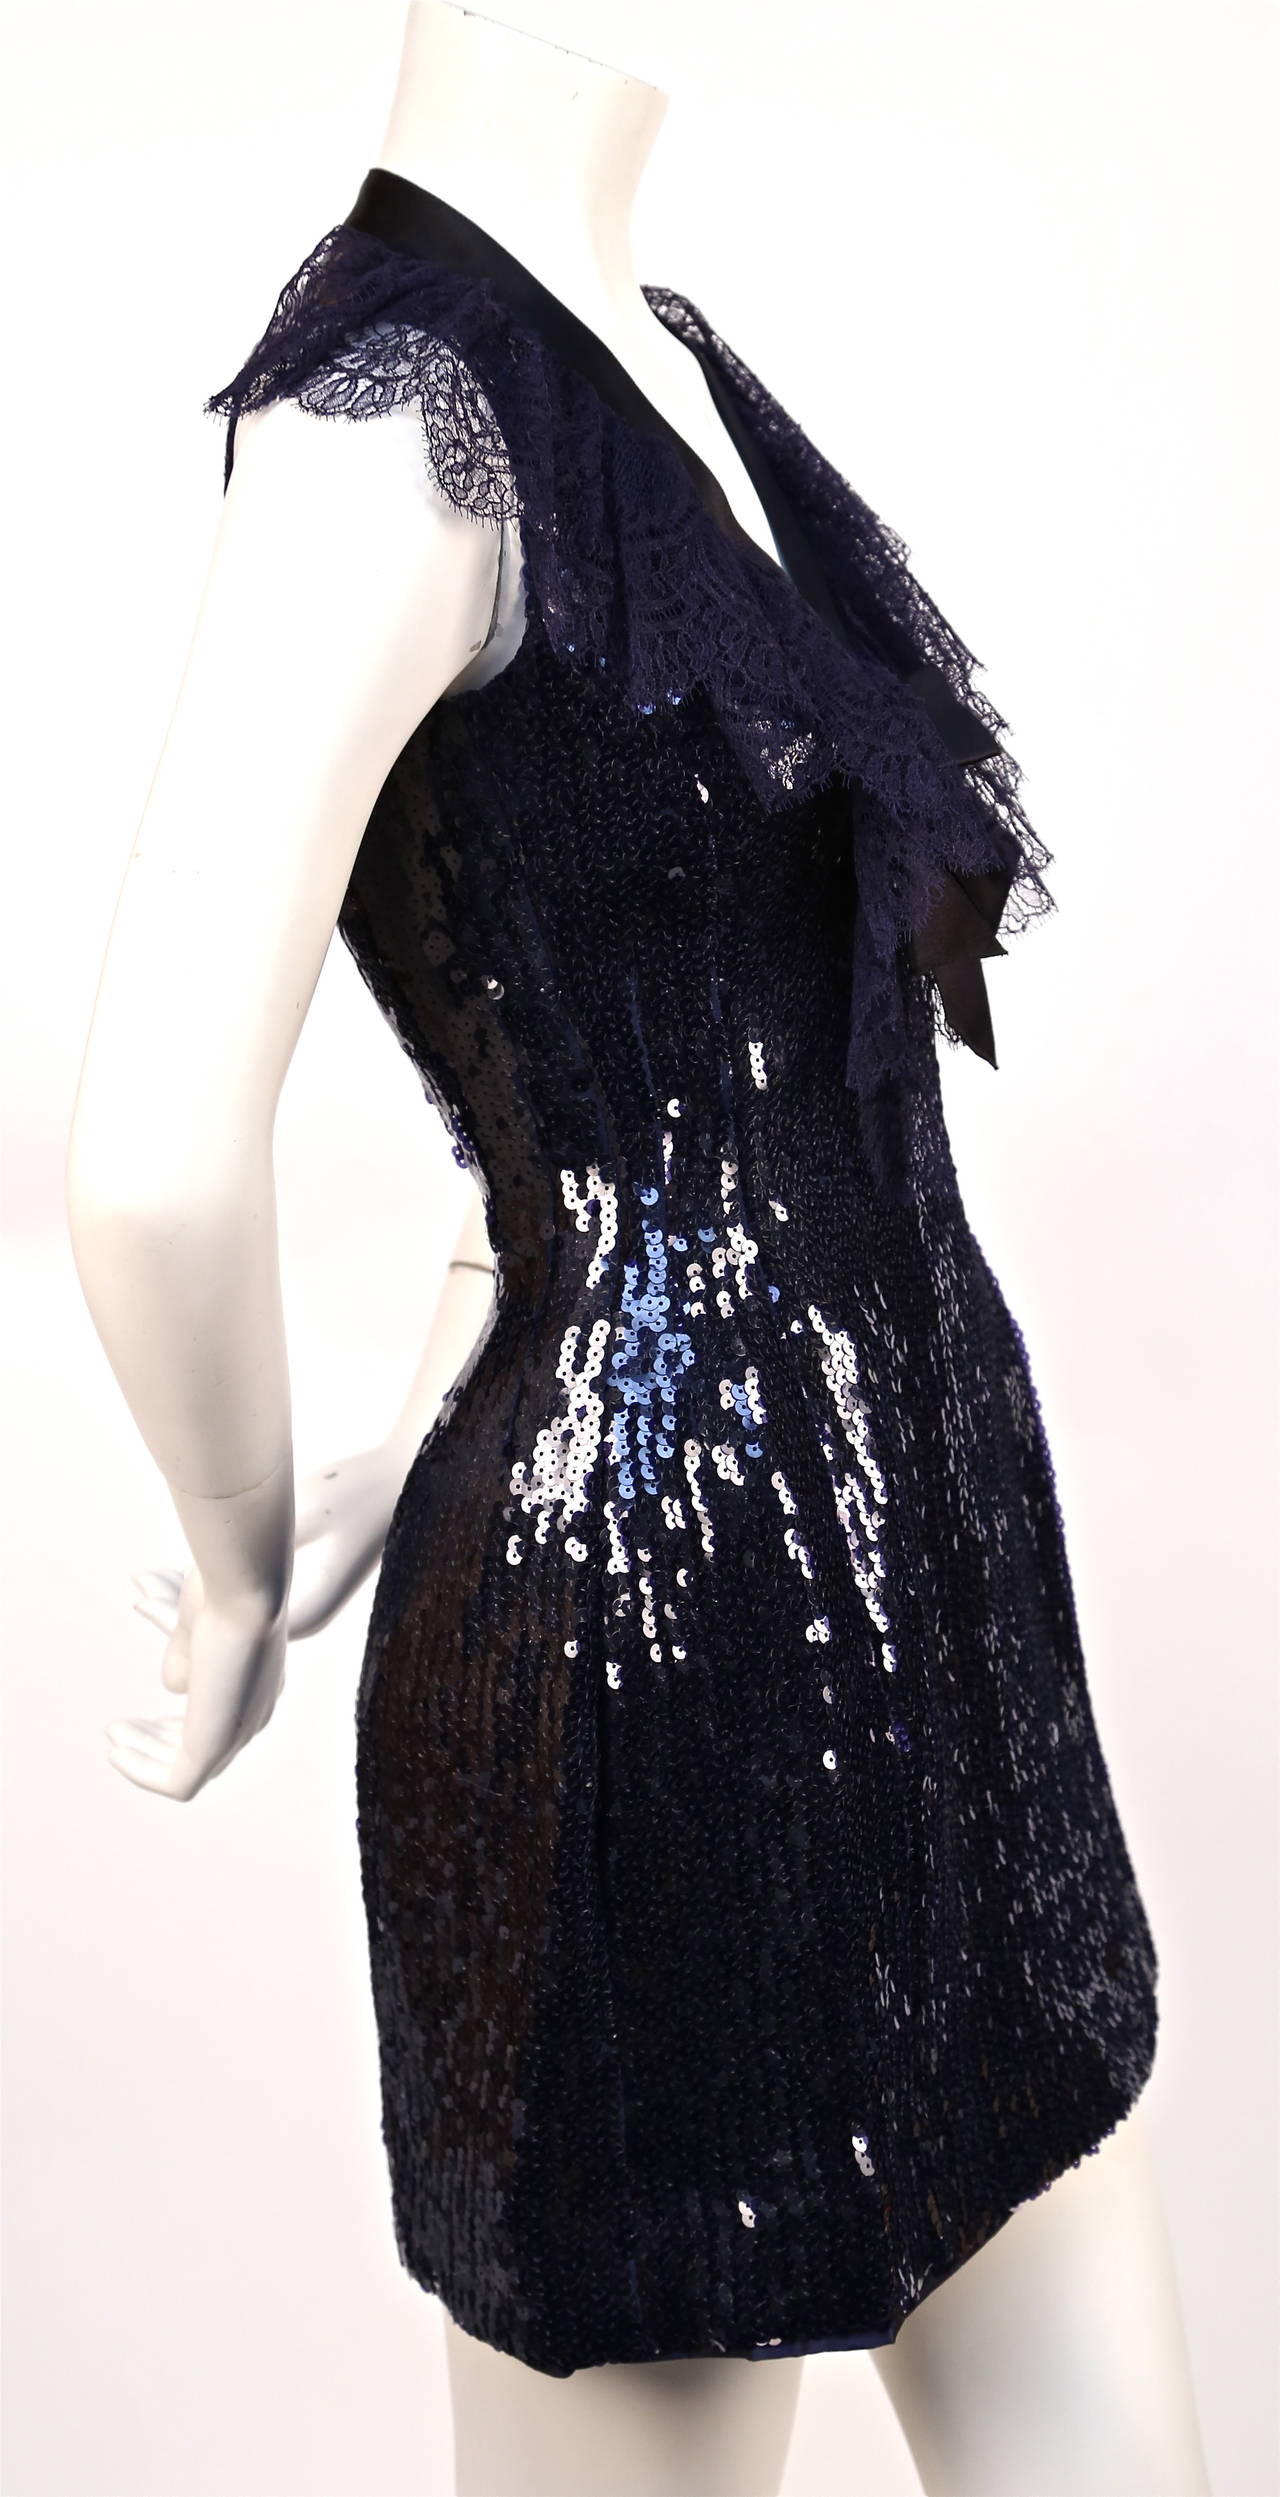 1987 CHANEL navy blue sequined mini dress with chantilly lace collar & satin bow In Excellent Condition In San Fransisco, CA